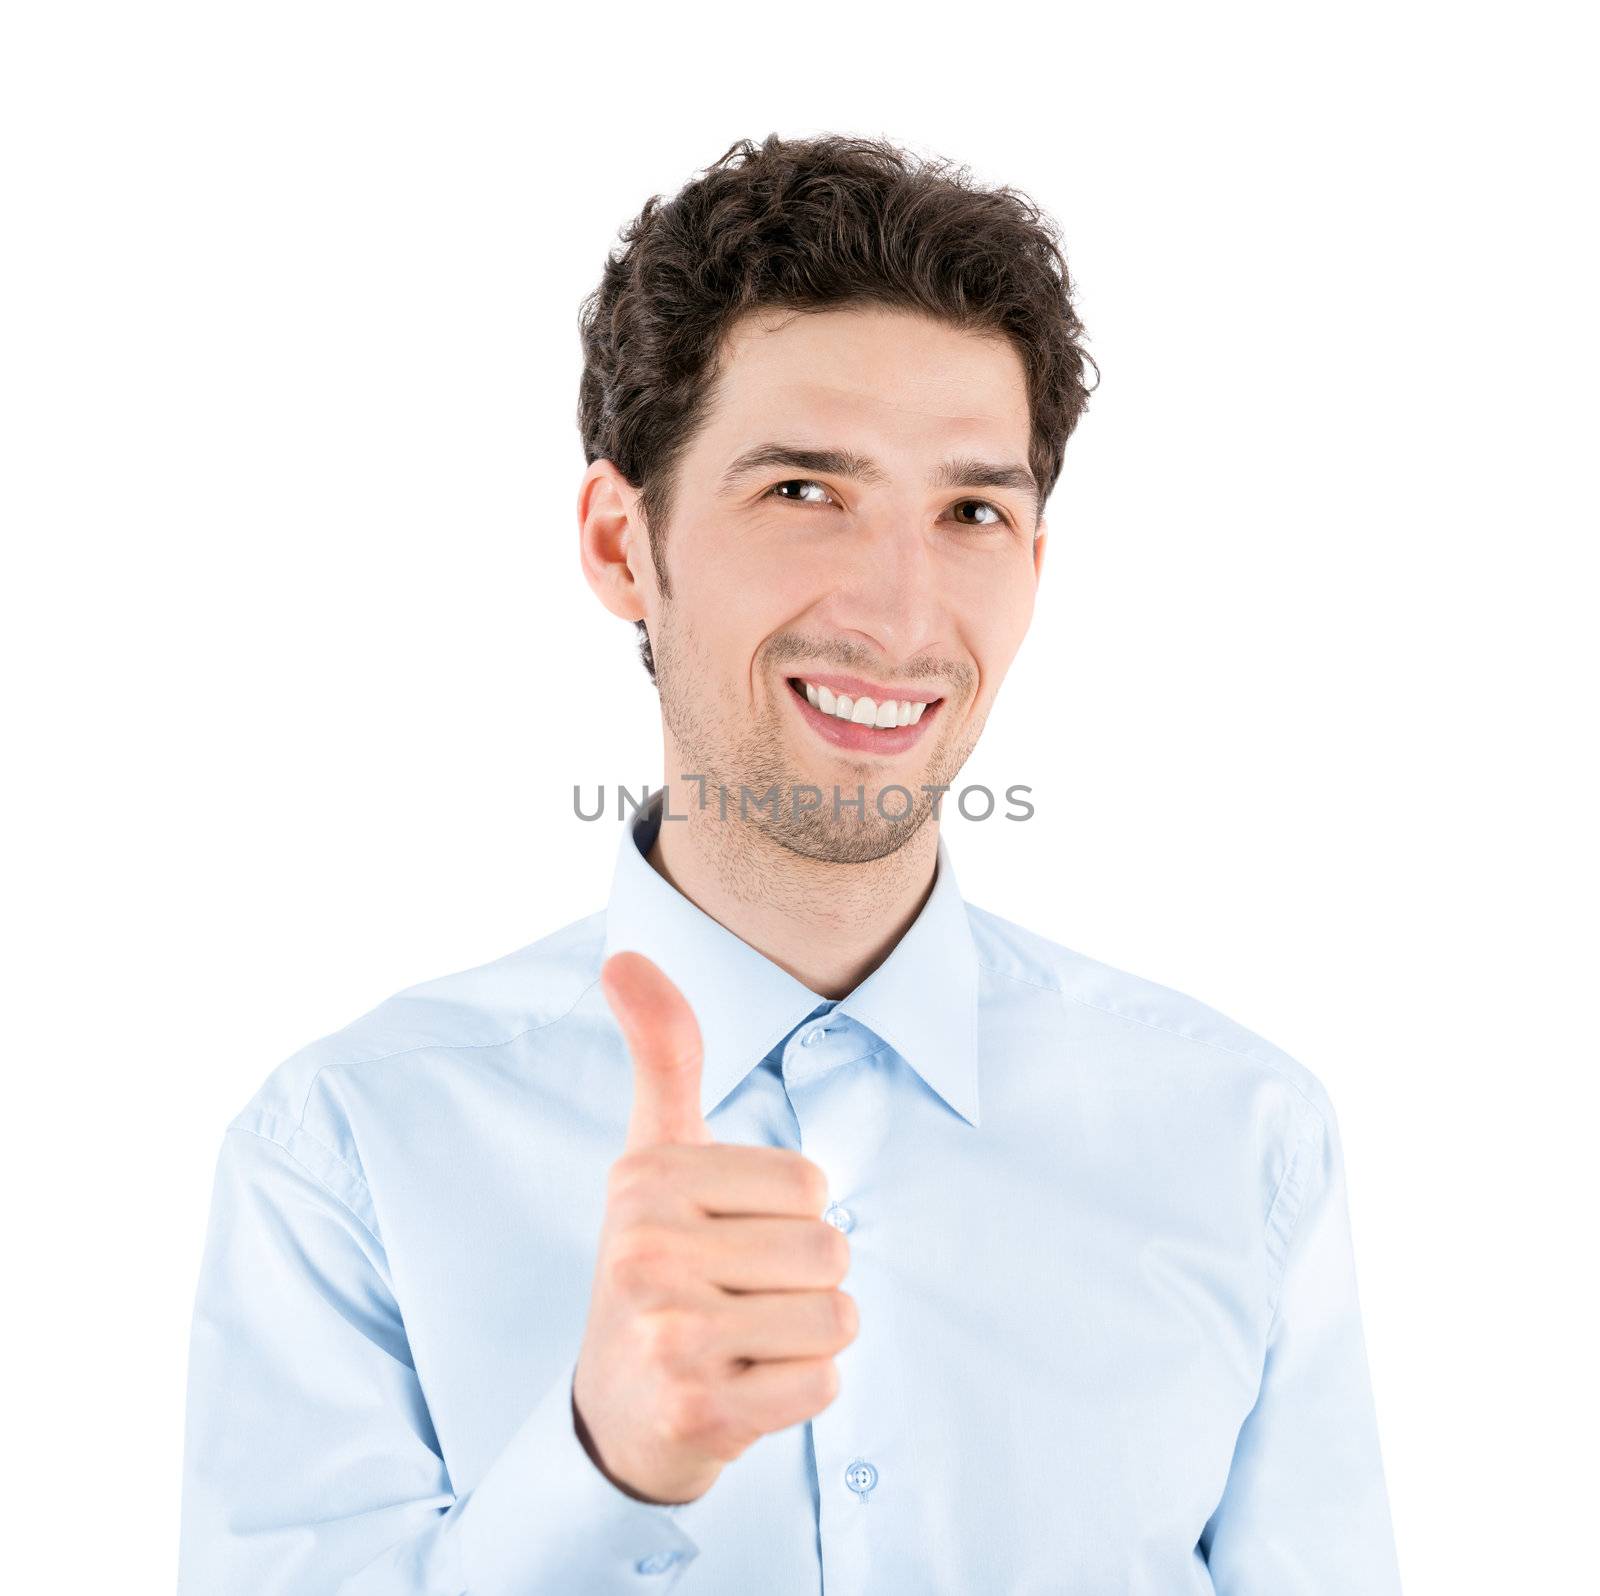 Close-up portrait of a successful handsome businessman who smiles and shows a thumb up gesture to camera. Isolated on white background.